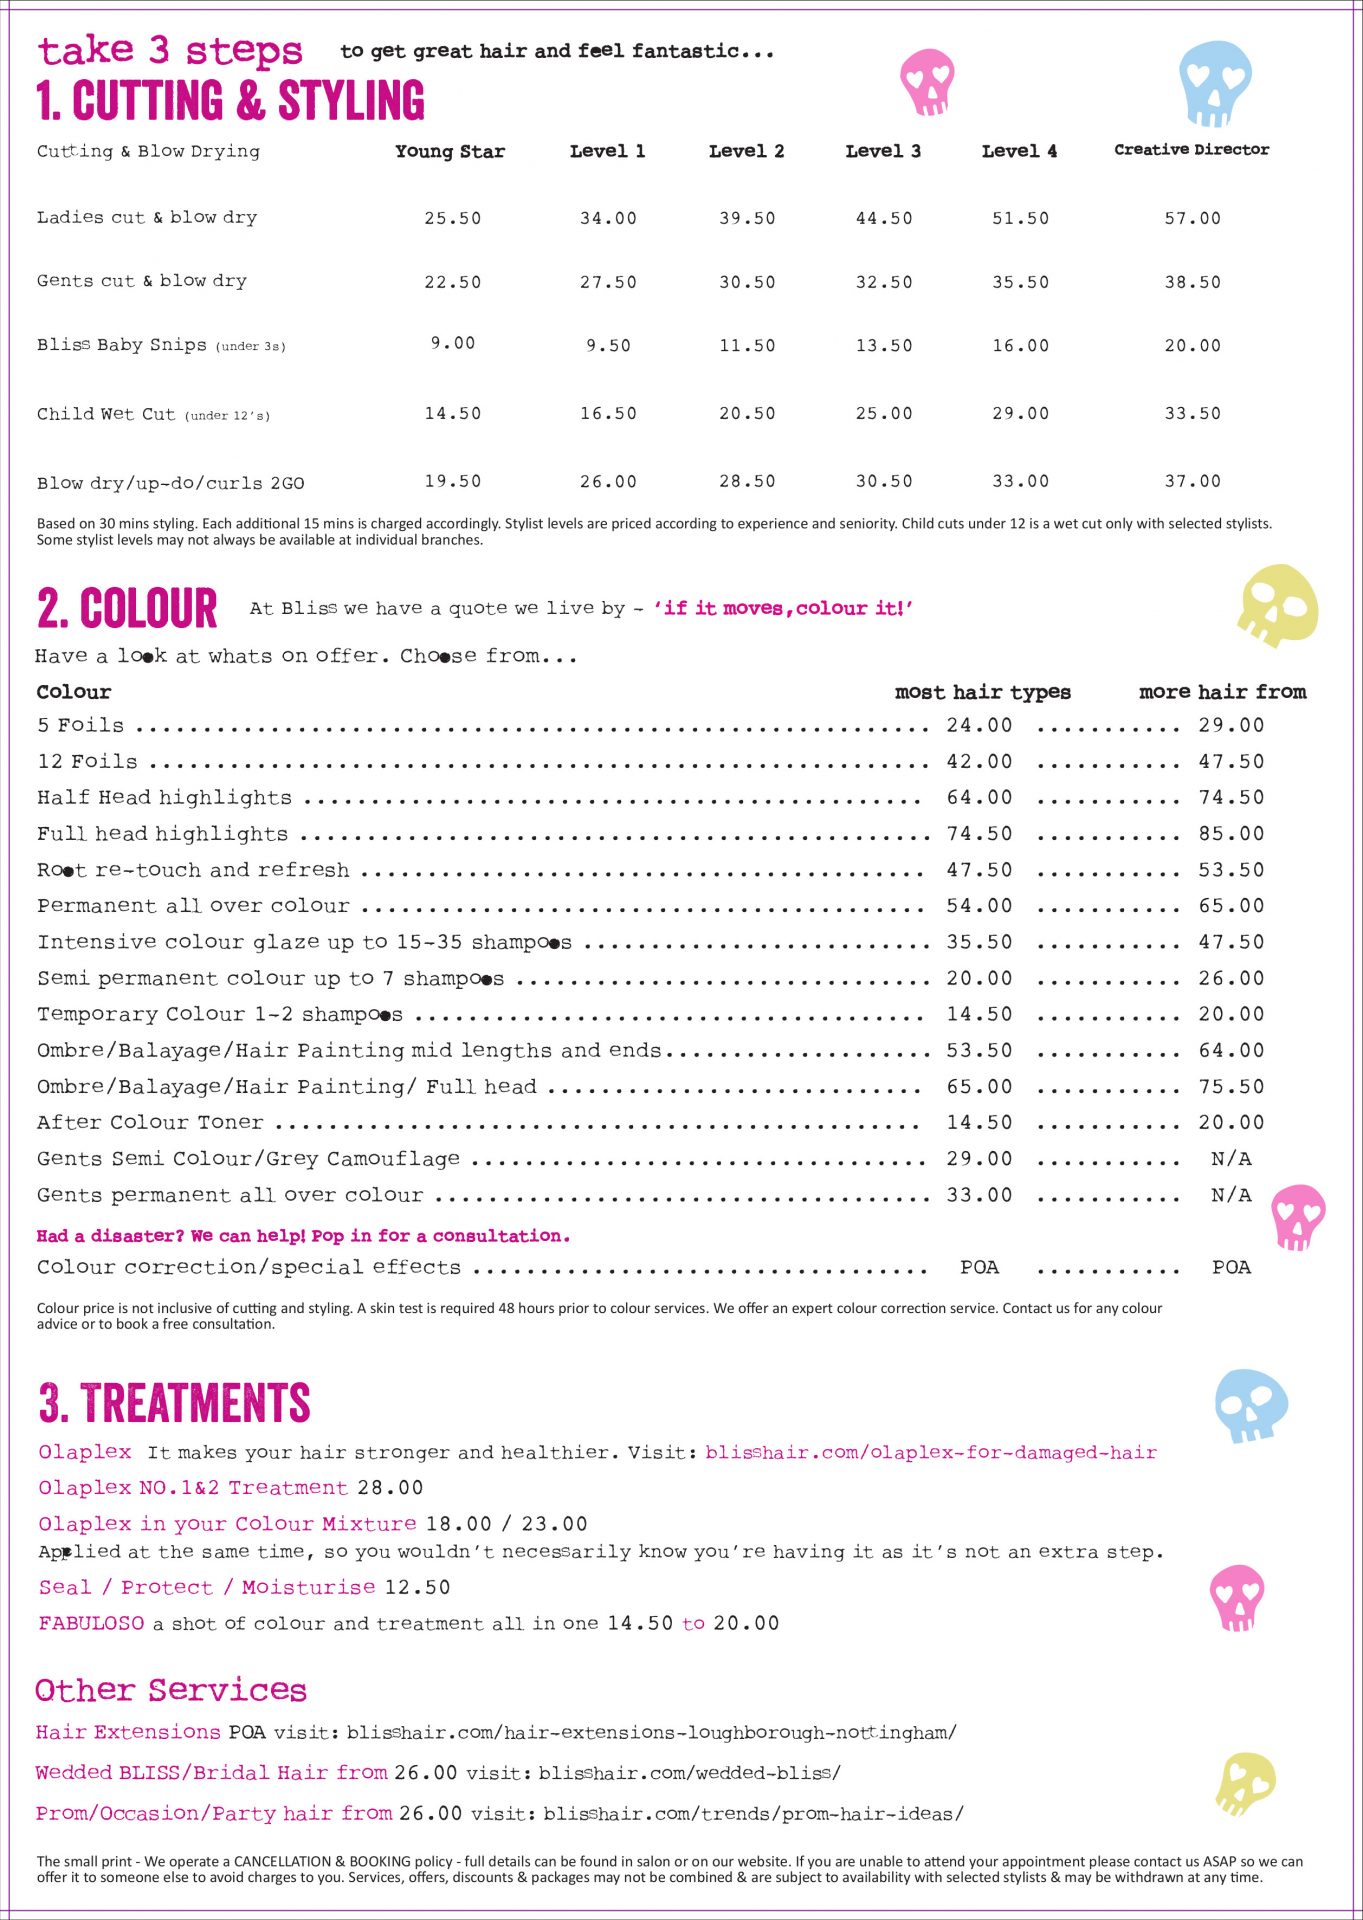 Price List For services at Bliss Hair Salons in Nottingham & Loughborough